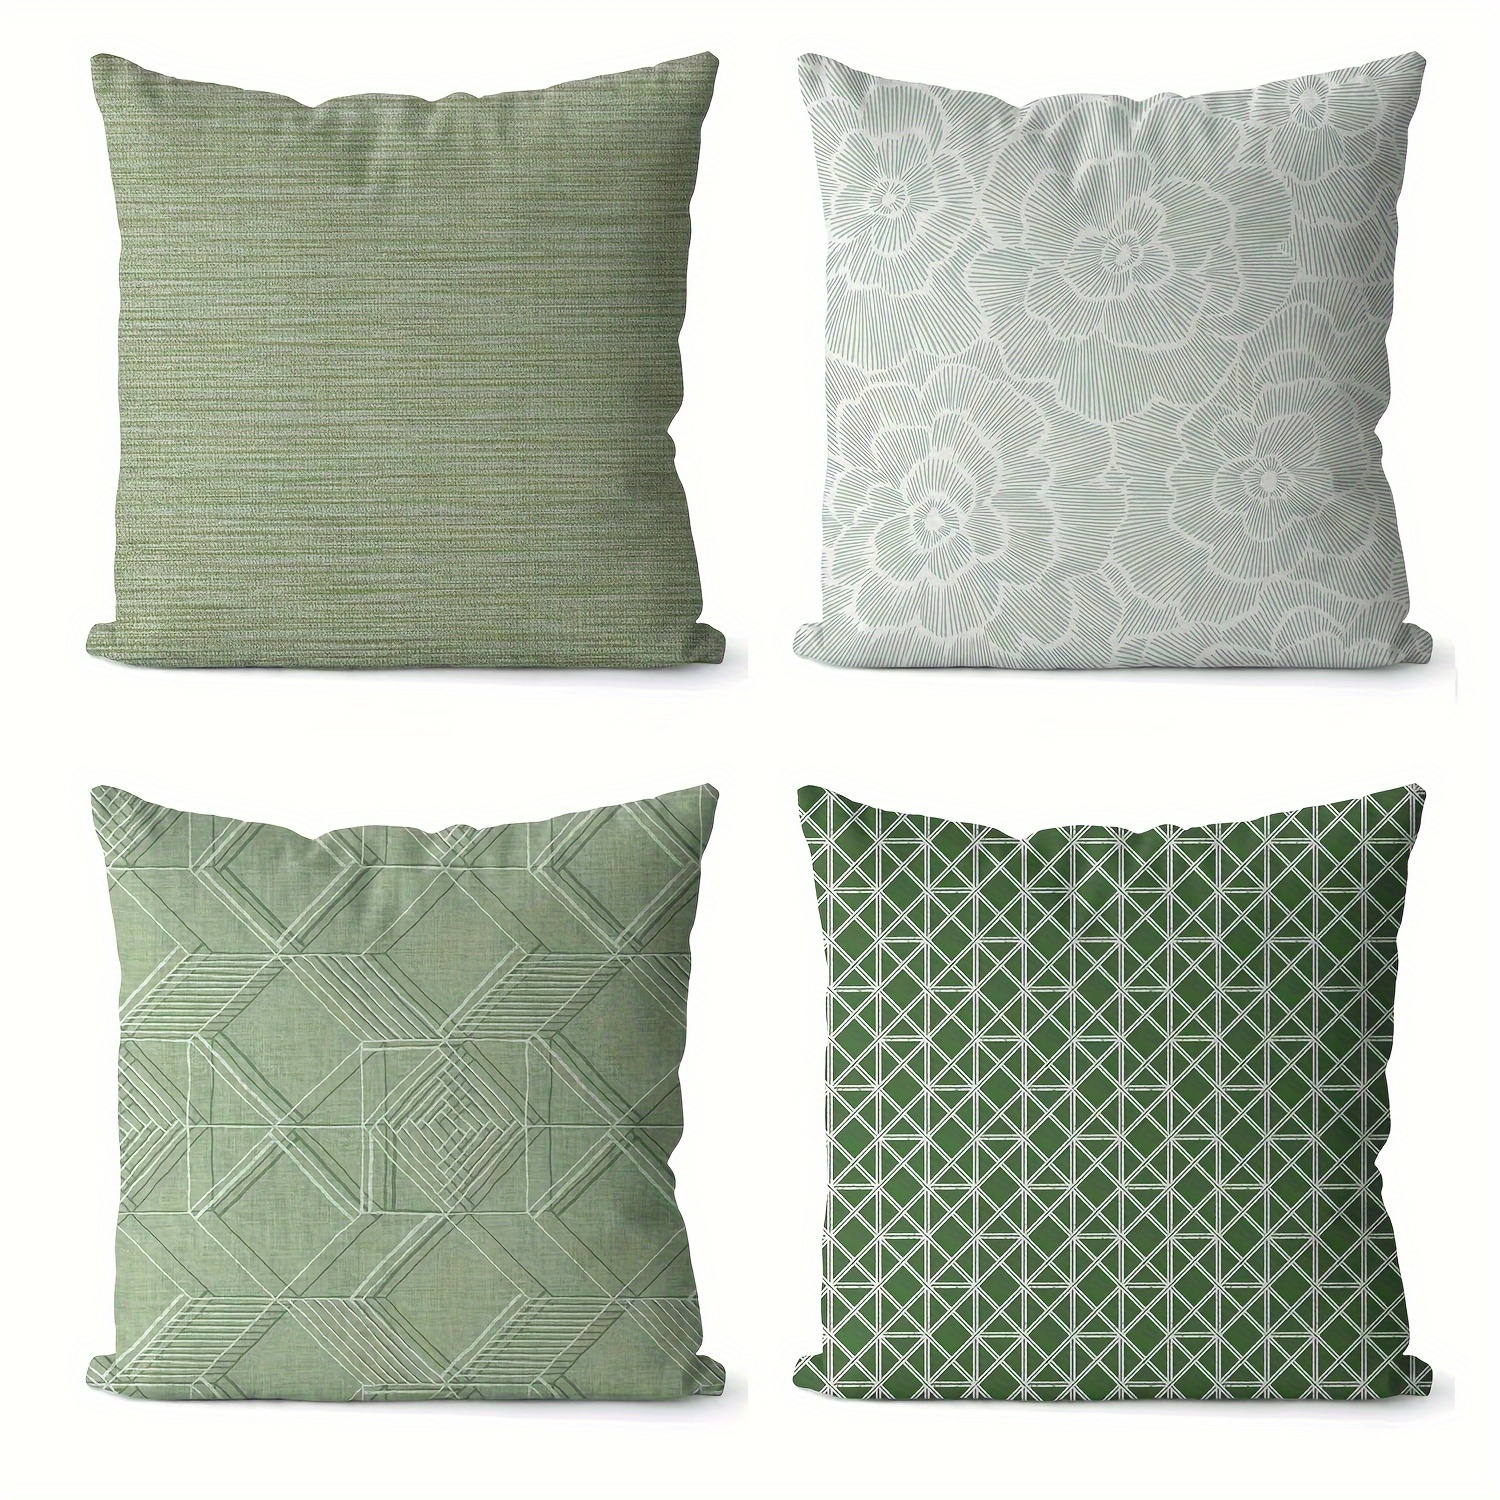 

4-pack Contemporary Style Linen Cushion Covers 17.72x17.72 Inch, Modern Simple One-side Print Throw Pillow Cases For Home Living Room Sofa Car Decor, Festive Gift Idea(no Pillow Core)